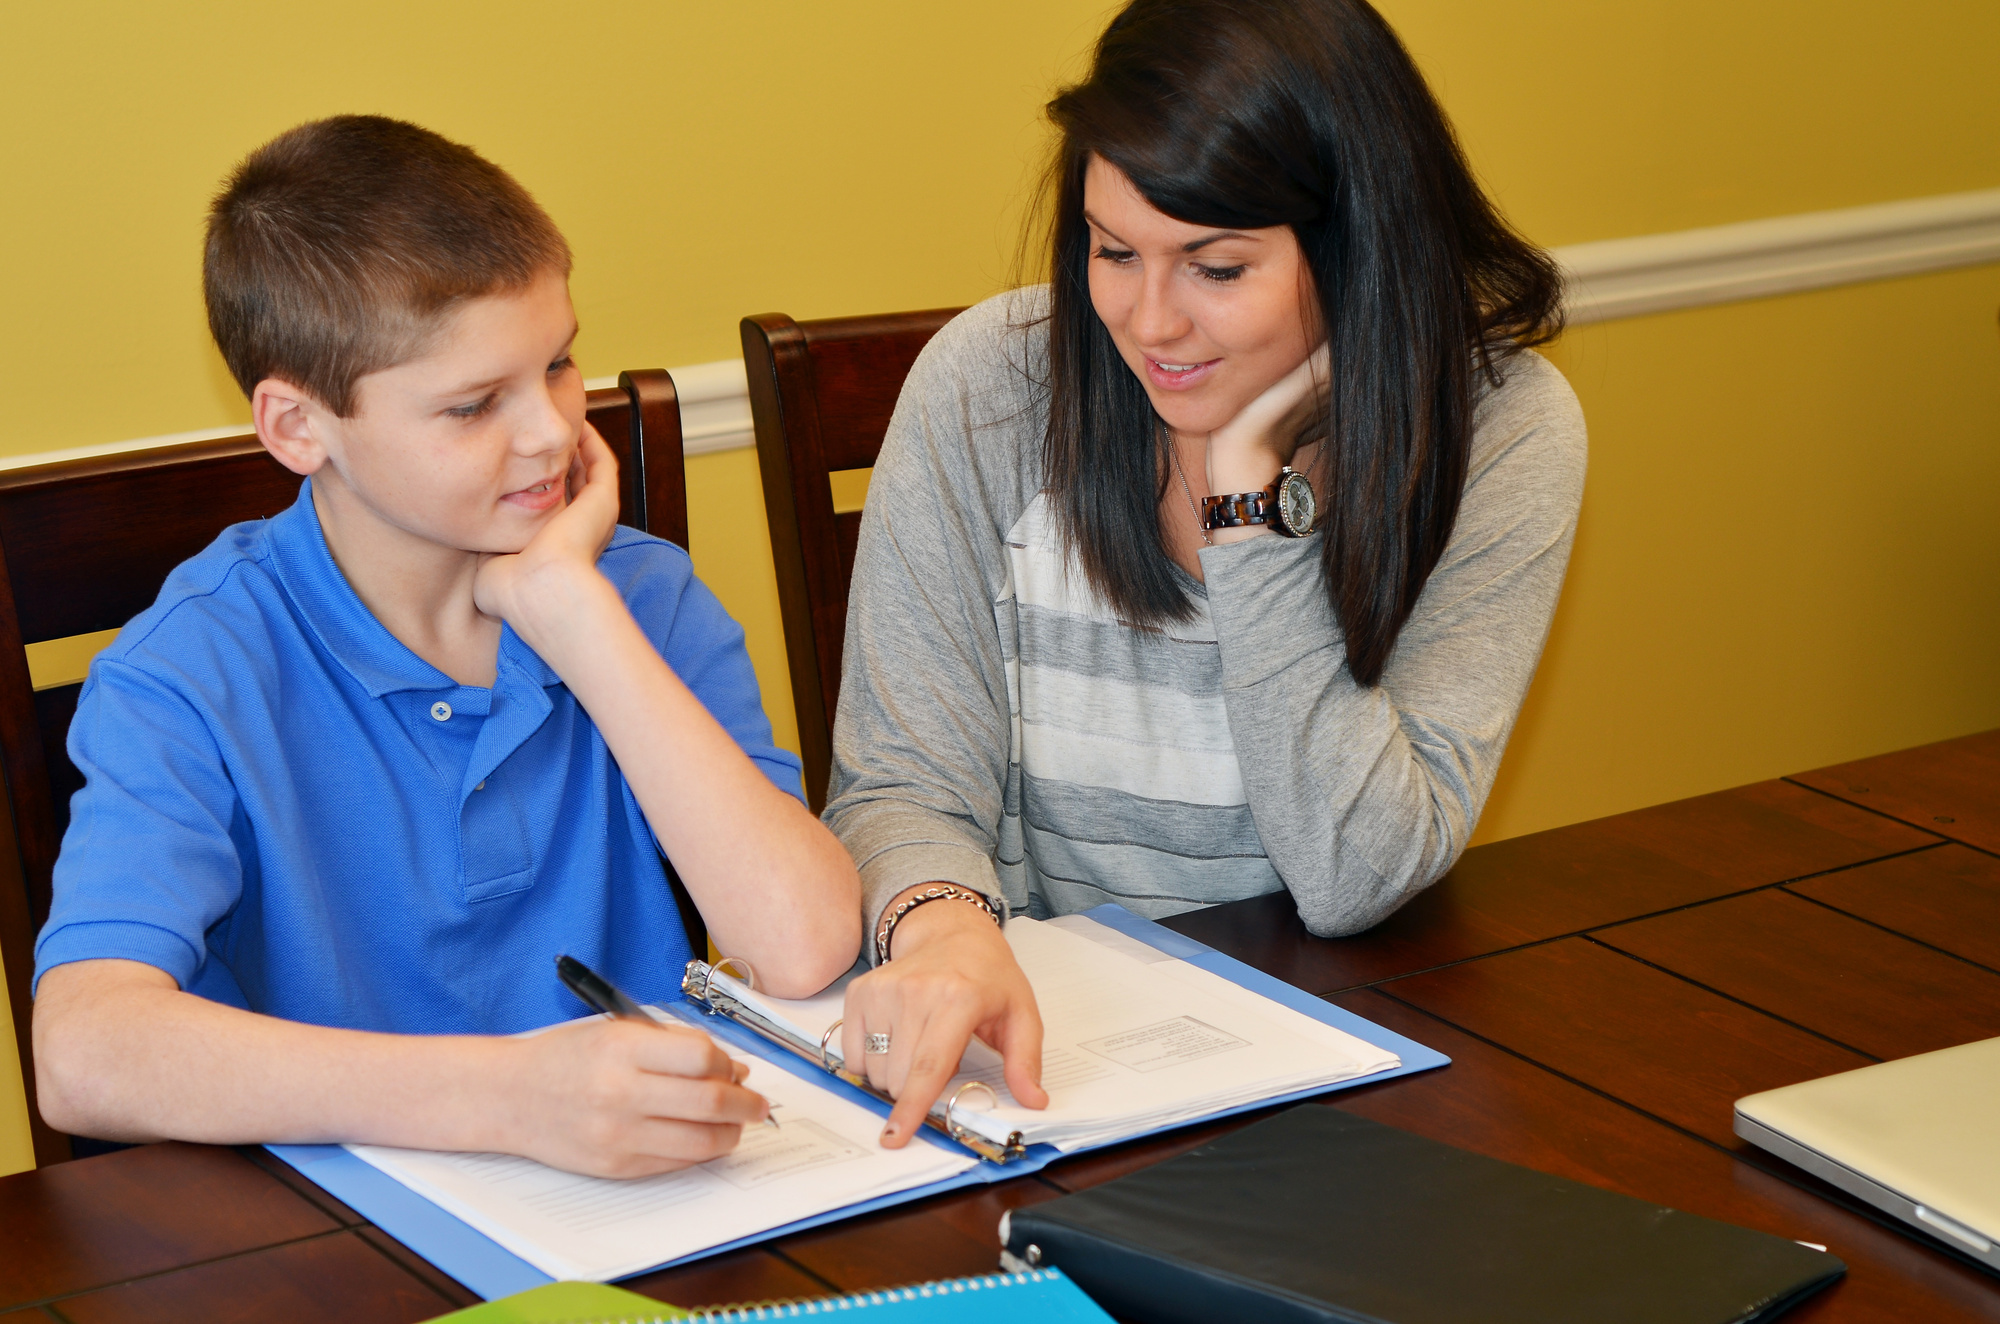 Create Your Own Home Tutoring Business Plan In Easy Steps